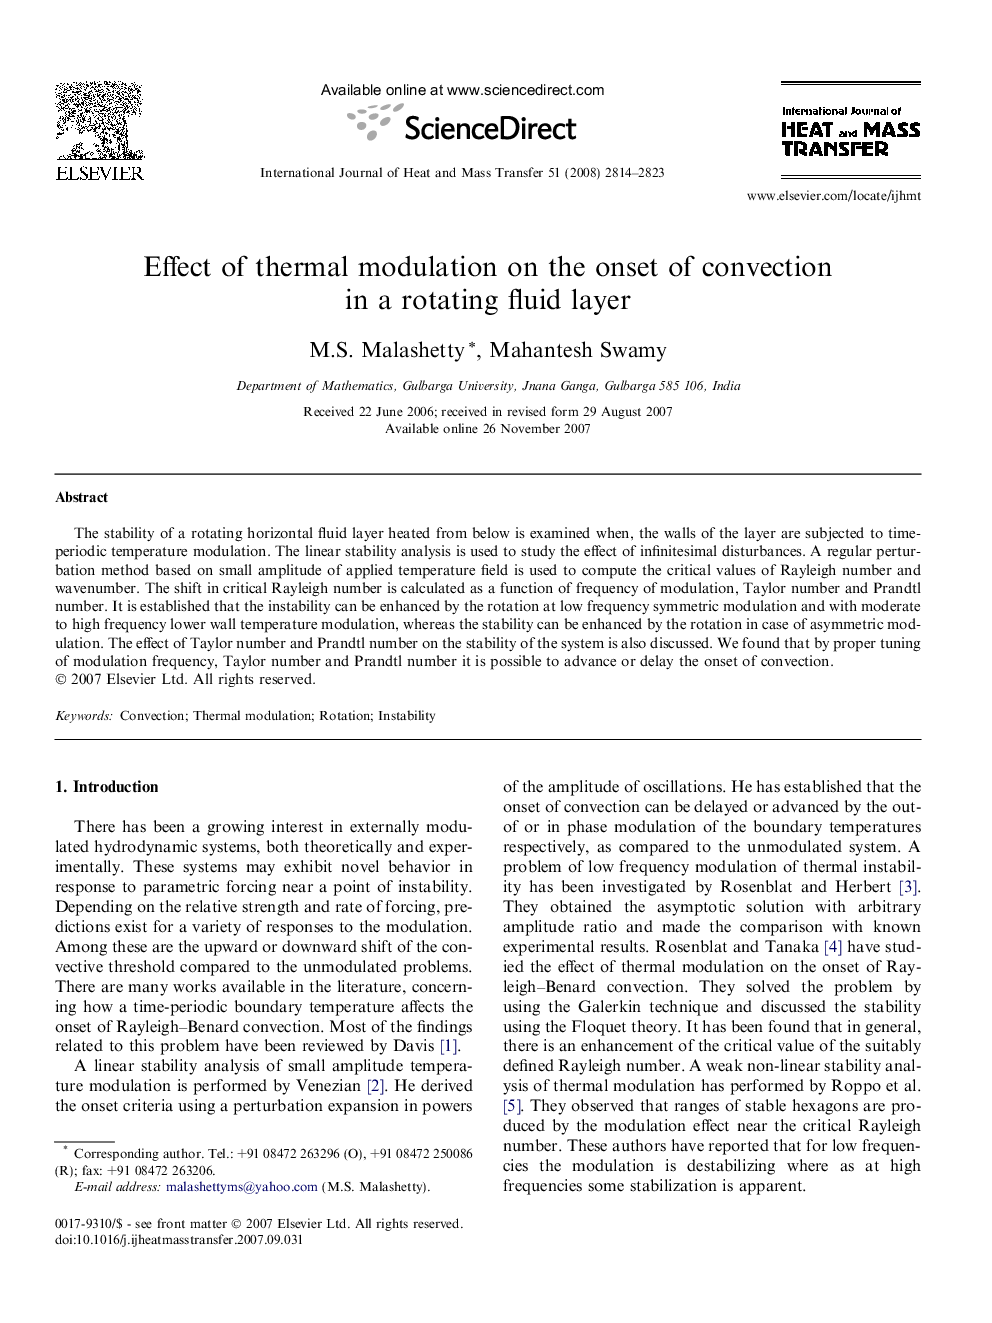 Effect of thermal modulation on the onset of convection in a rotating fluid layer